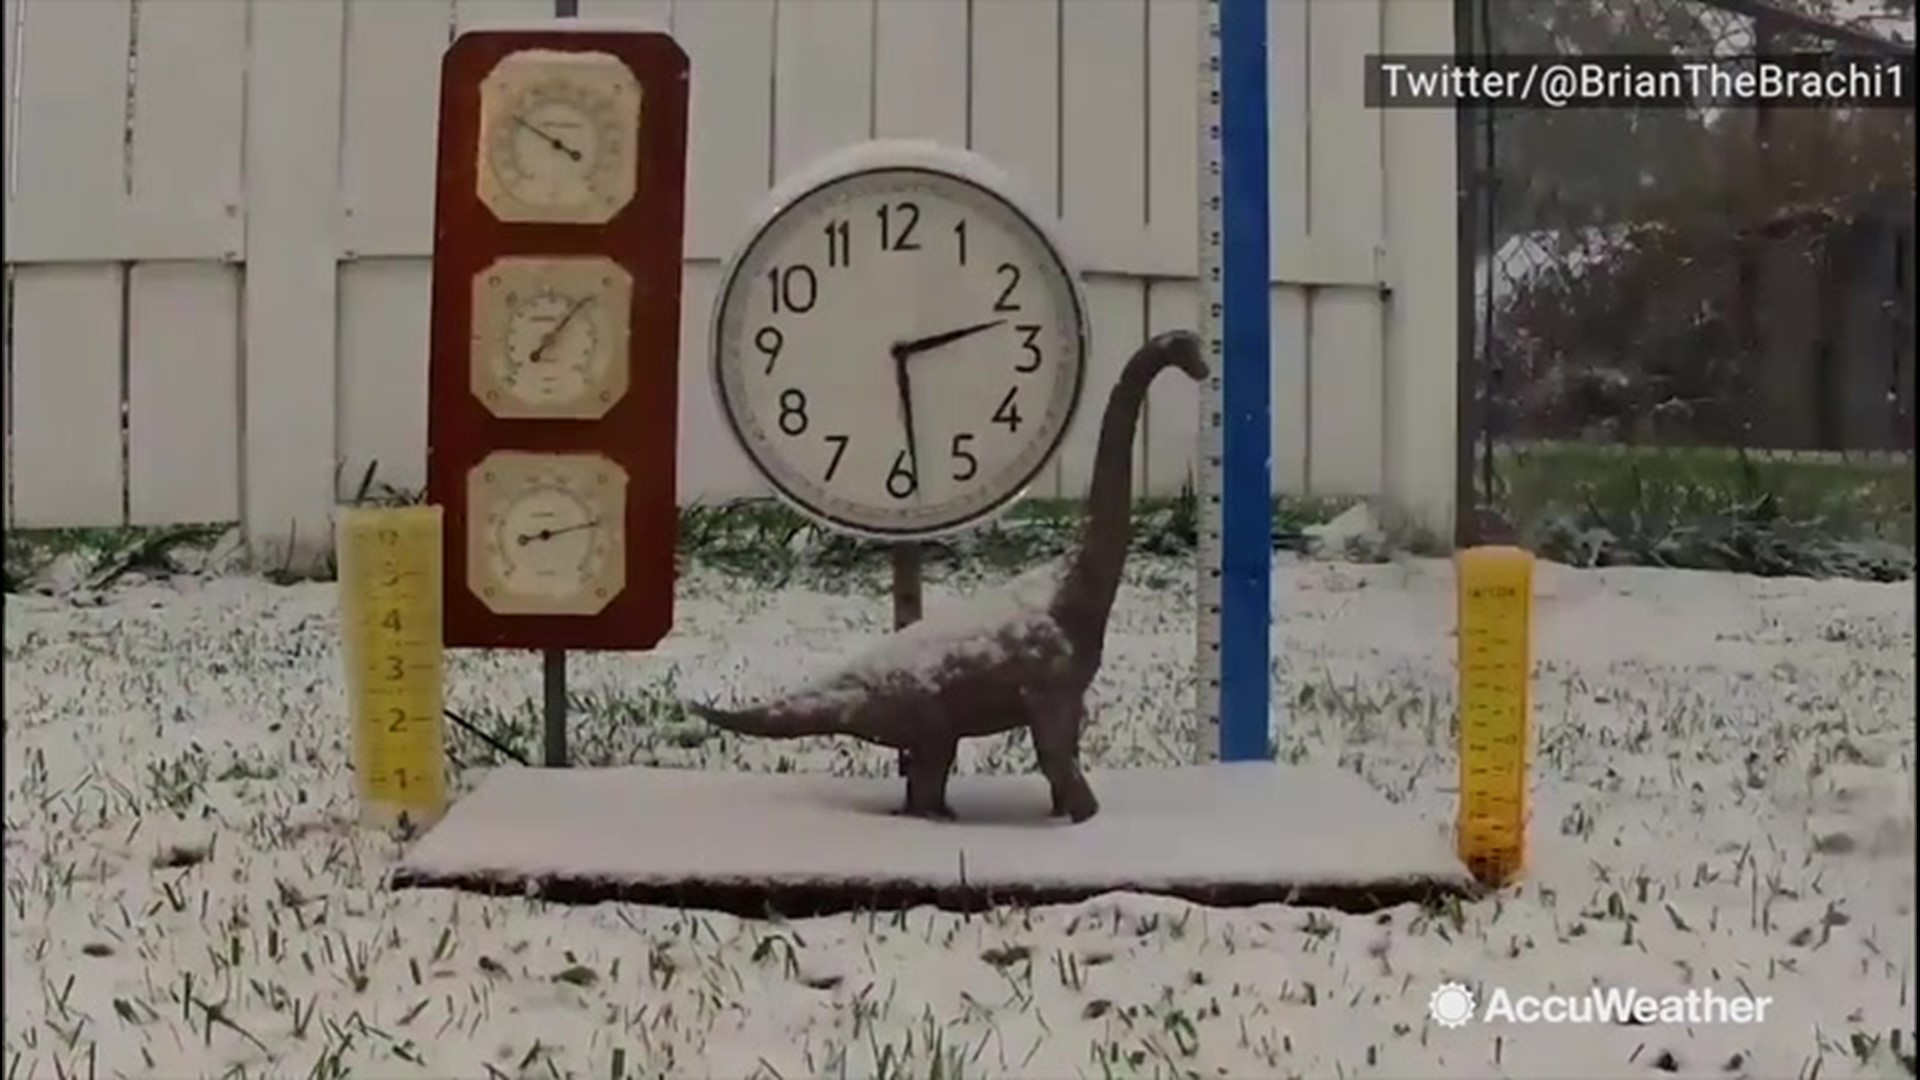 Twitter user Brian the Brachiosaurus created a lovely video showing the progression of the snow in Point Place, Ohio, on Nov. 12, even though their clock literally froze from freezing rain at 3:44 p.m.